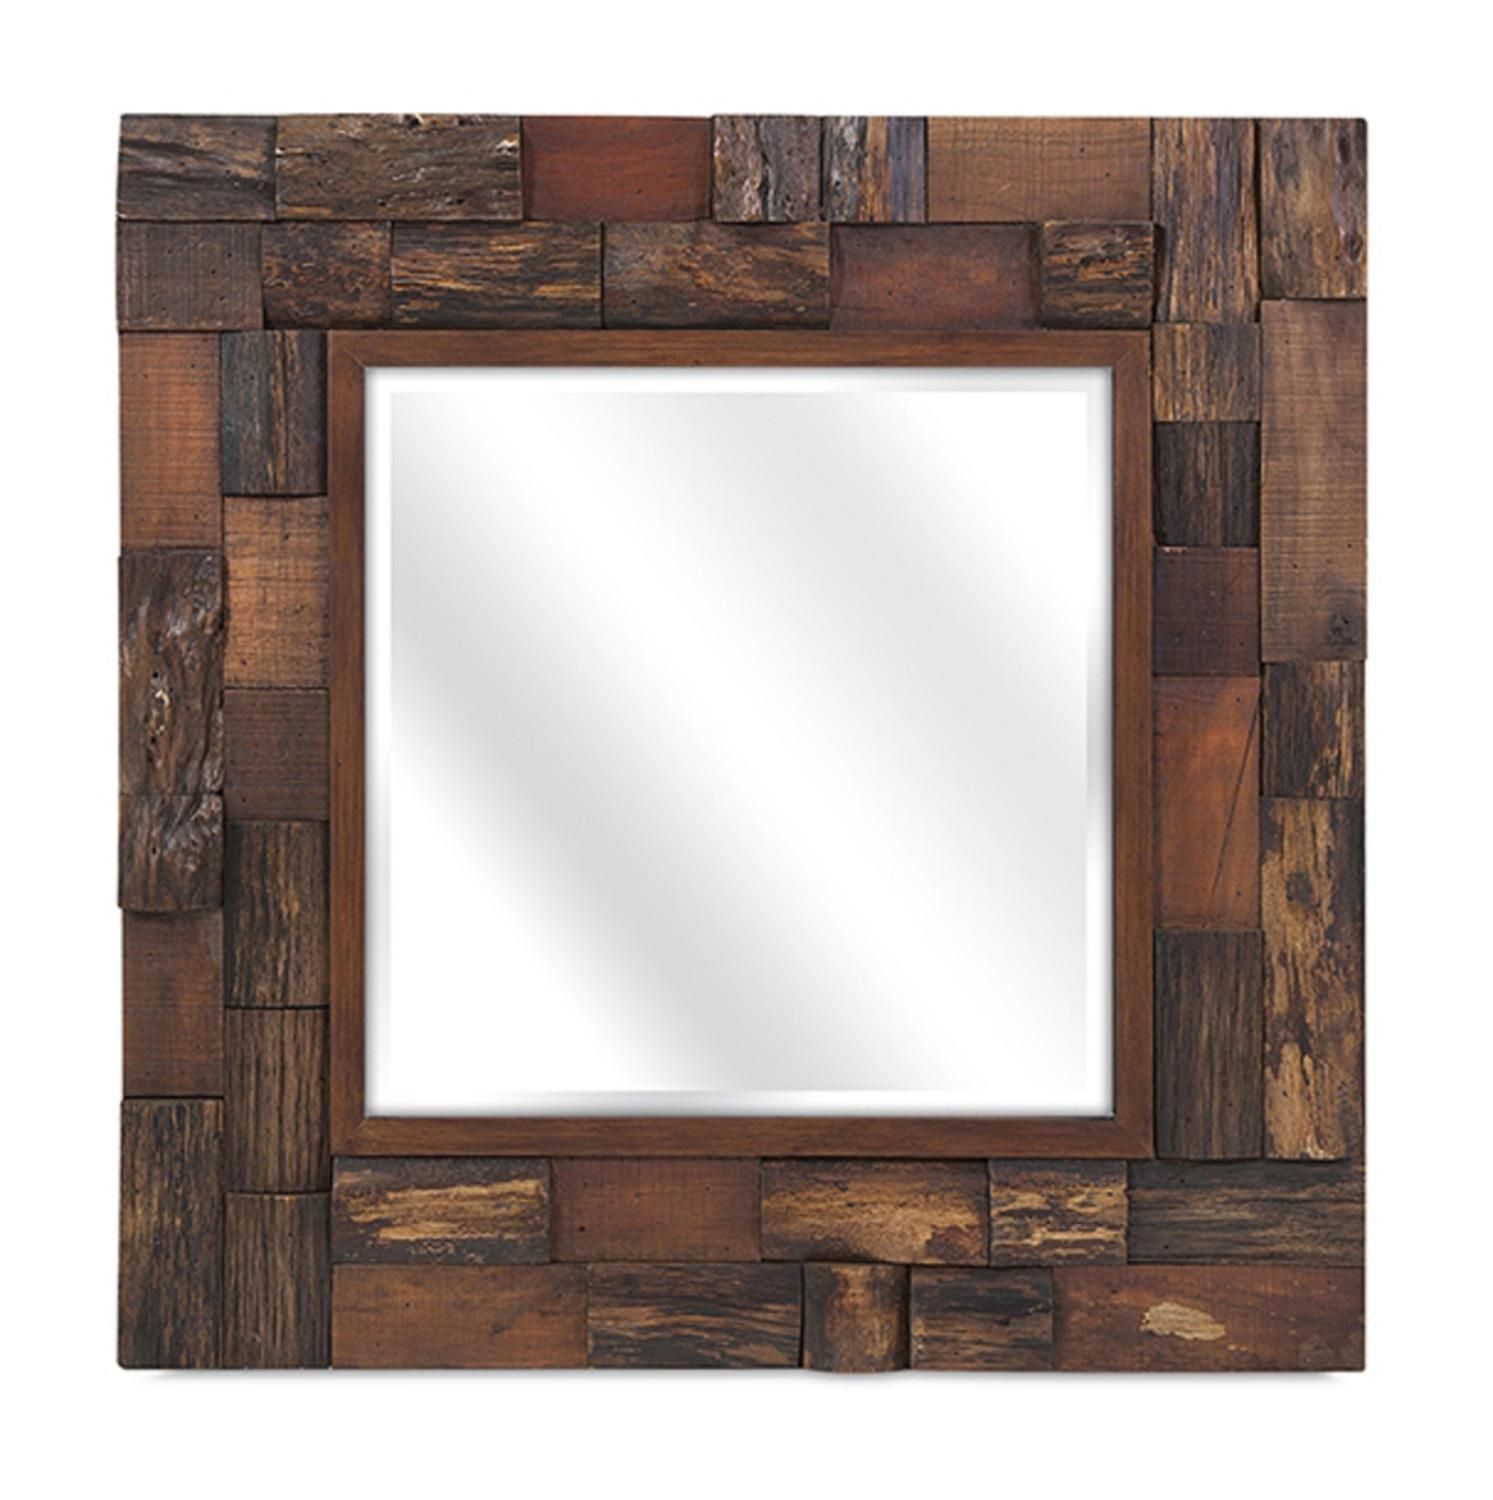 30" Rustic Masculine Baker Wood Finish Slat Square Beveled Wall Mirror With Regard To Rustic Getaway Wood Wall Mirrors (View 3 of 15)